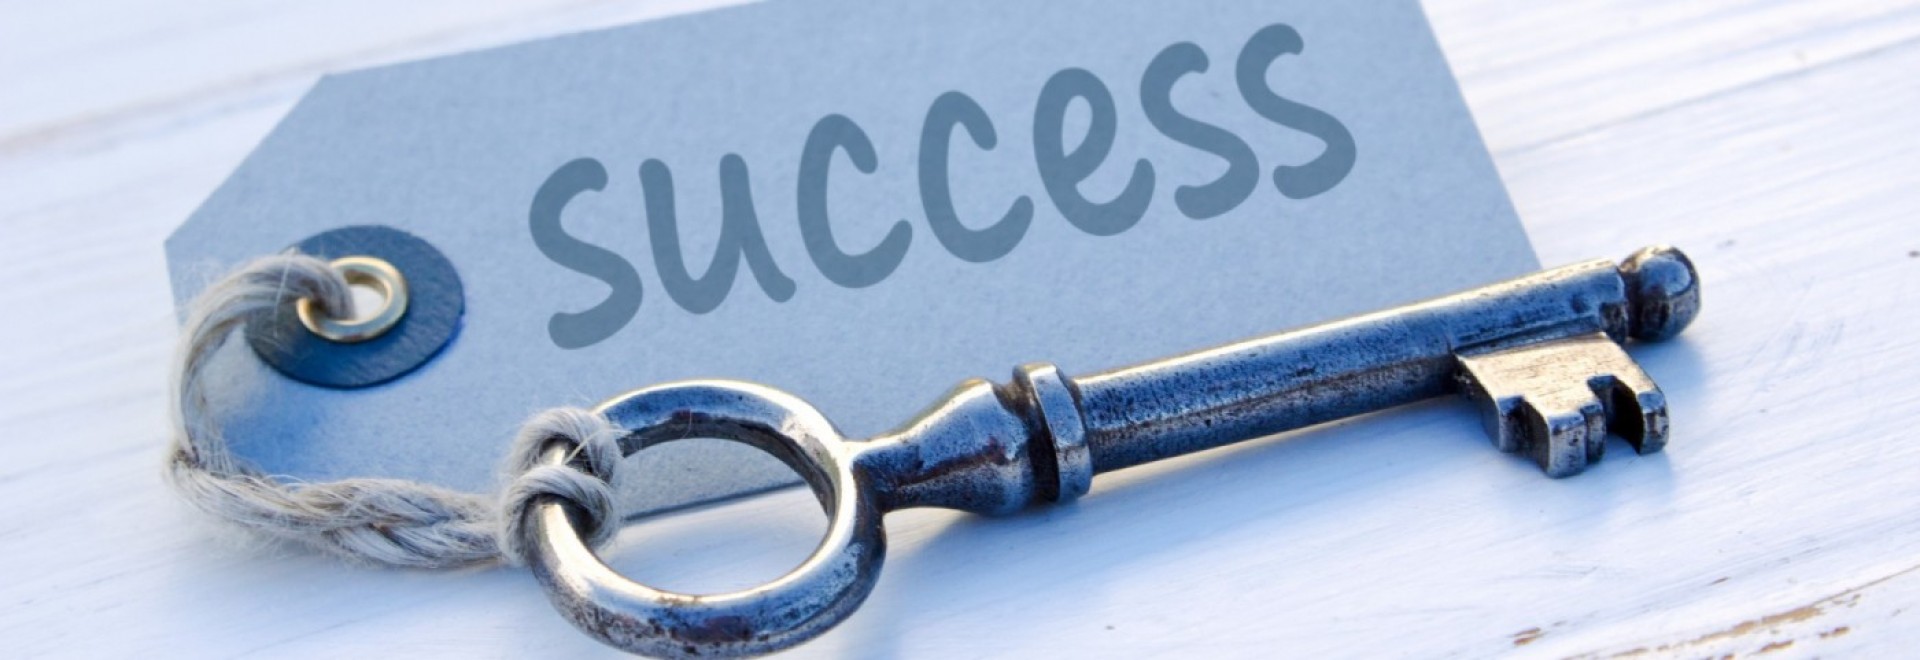 1920x660 top image with key to success